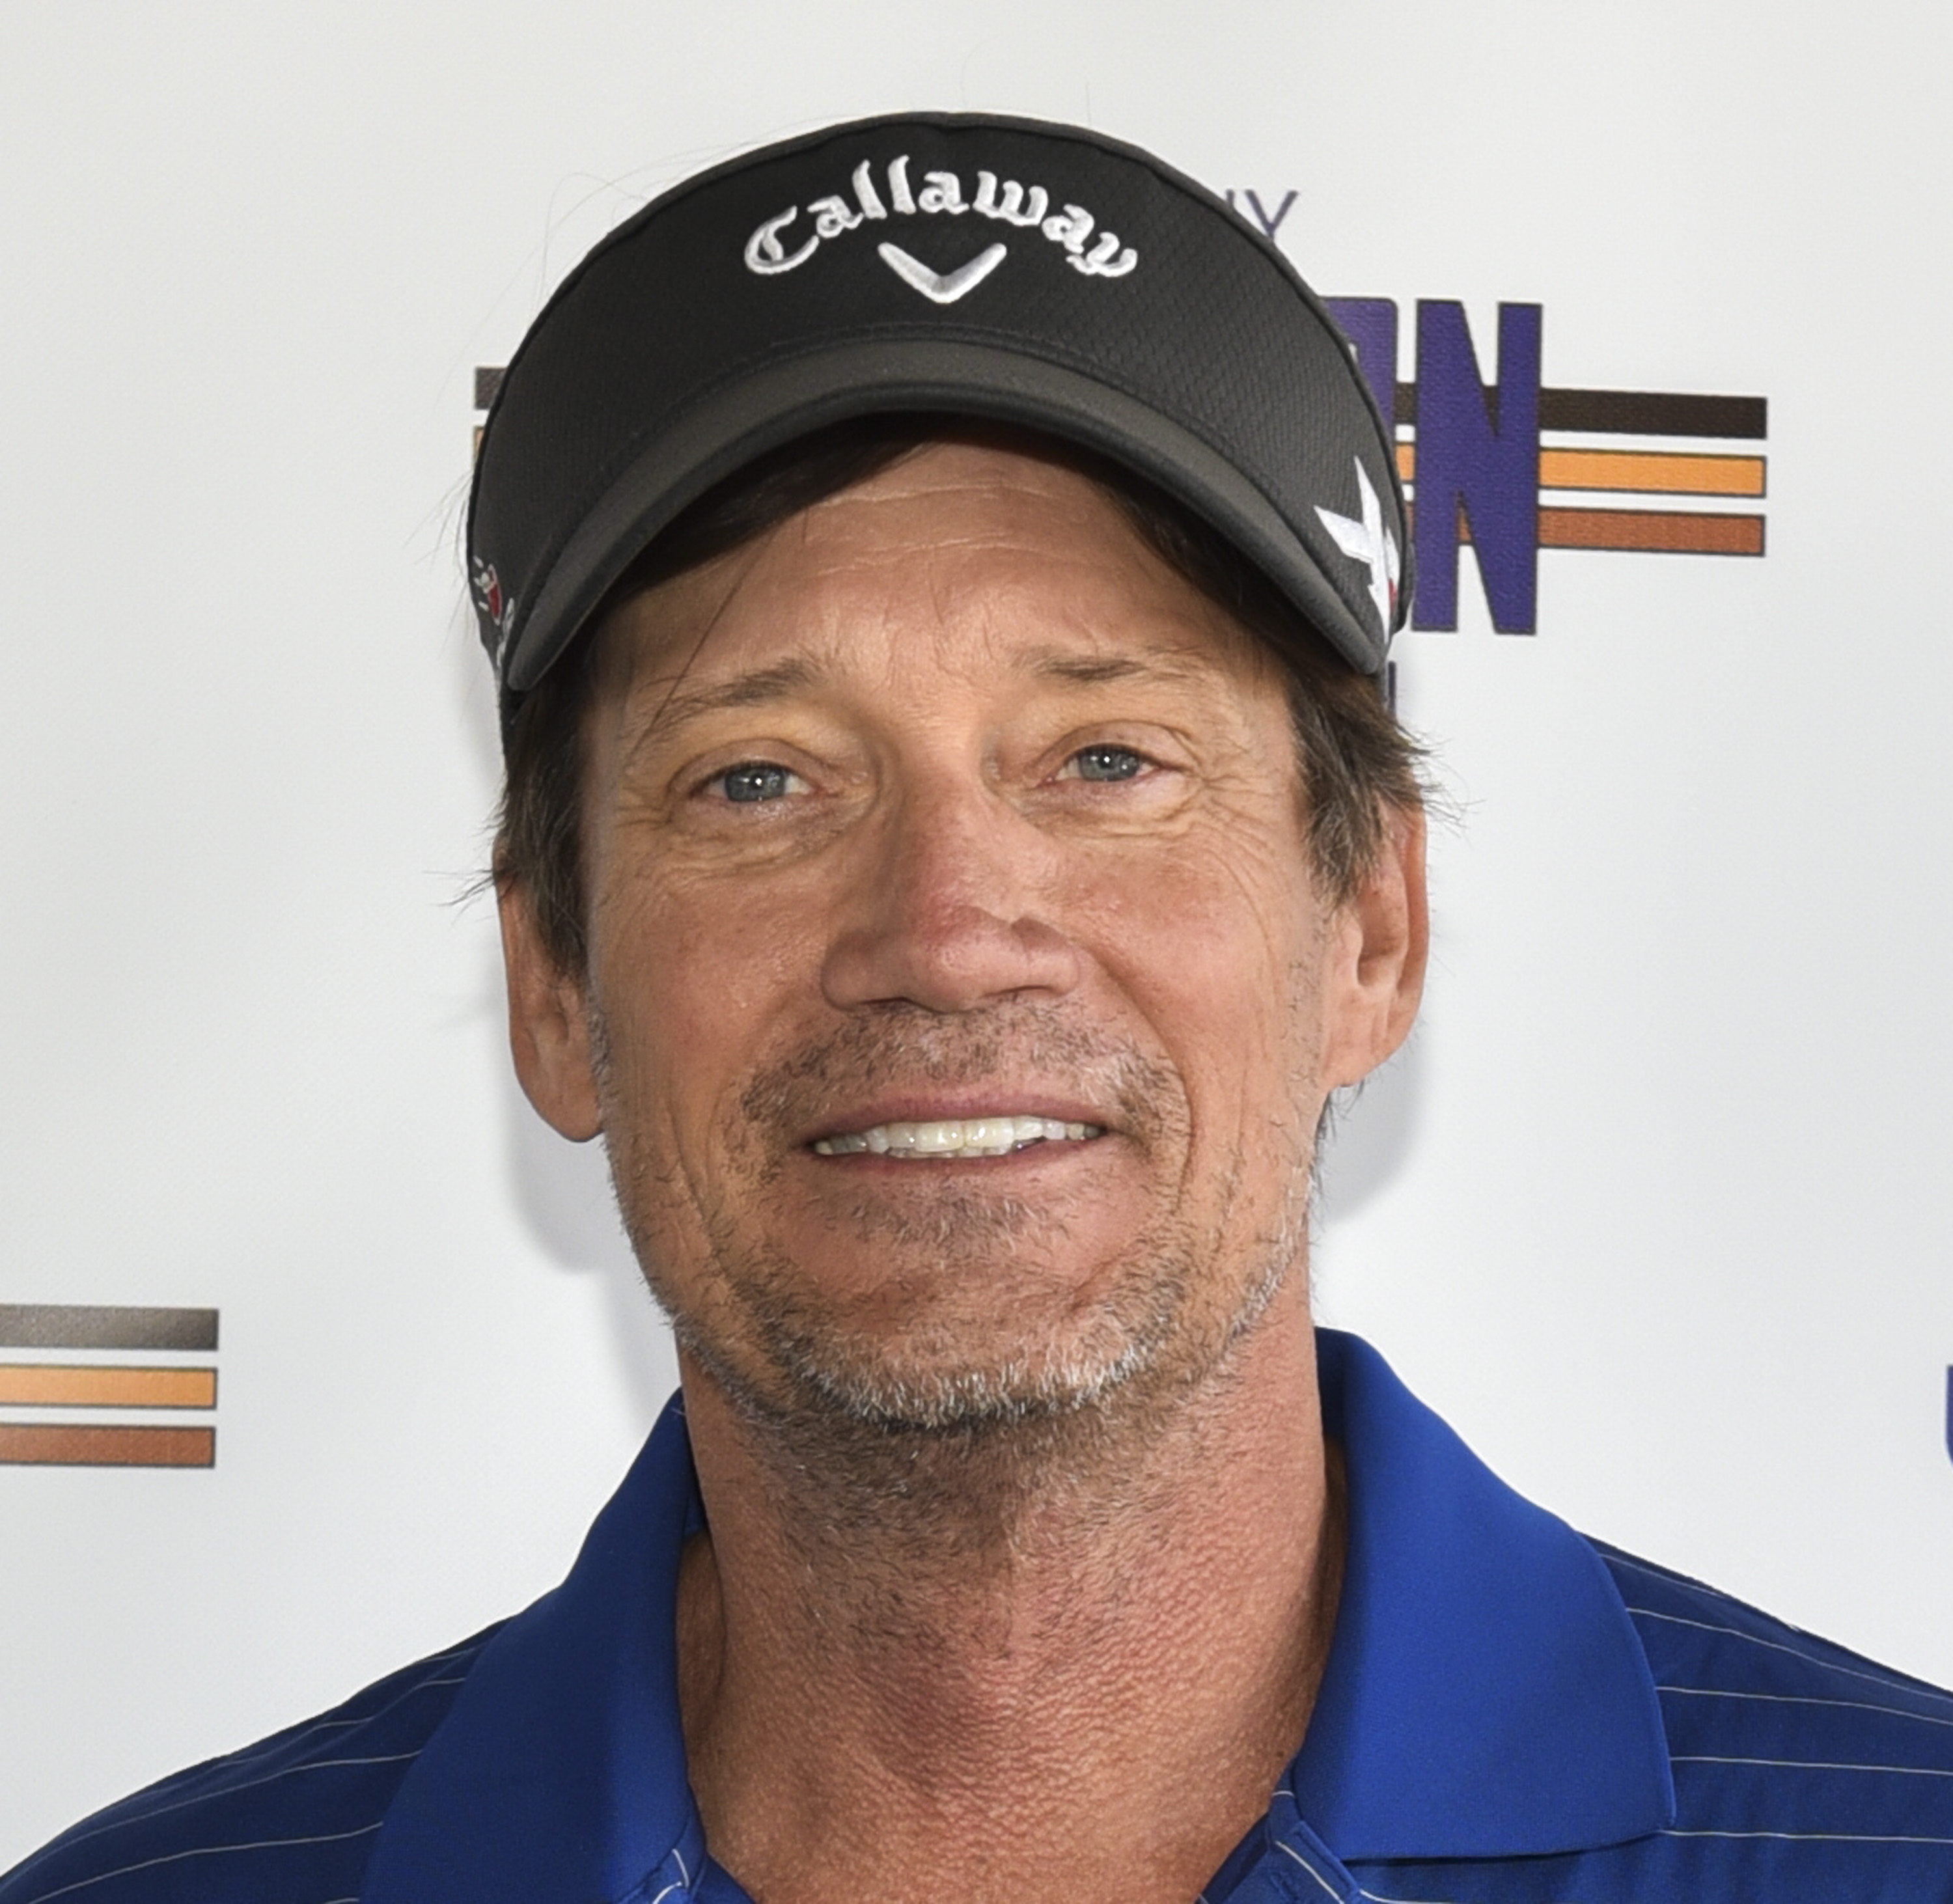 Kevin Sorbo at the 8th Annual Los Angeles Golf Classic event in Burbank, California on June 12, 2017 | Source: Getty Images